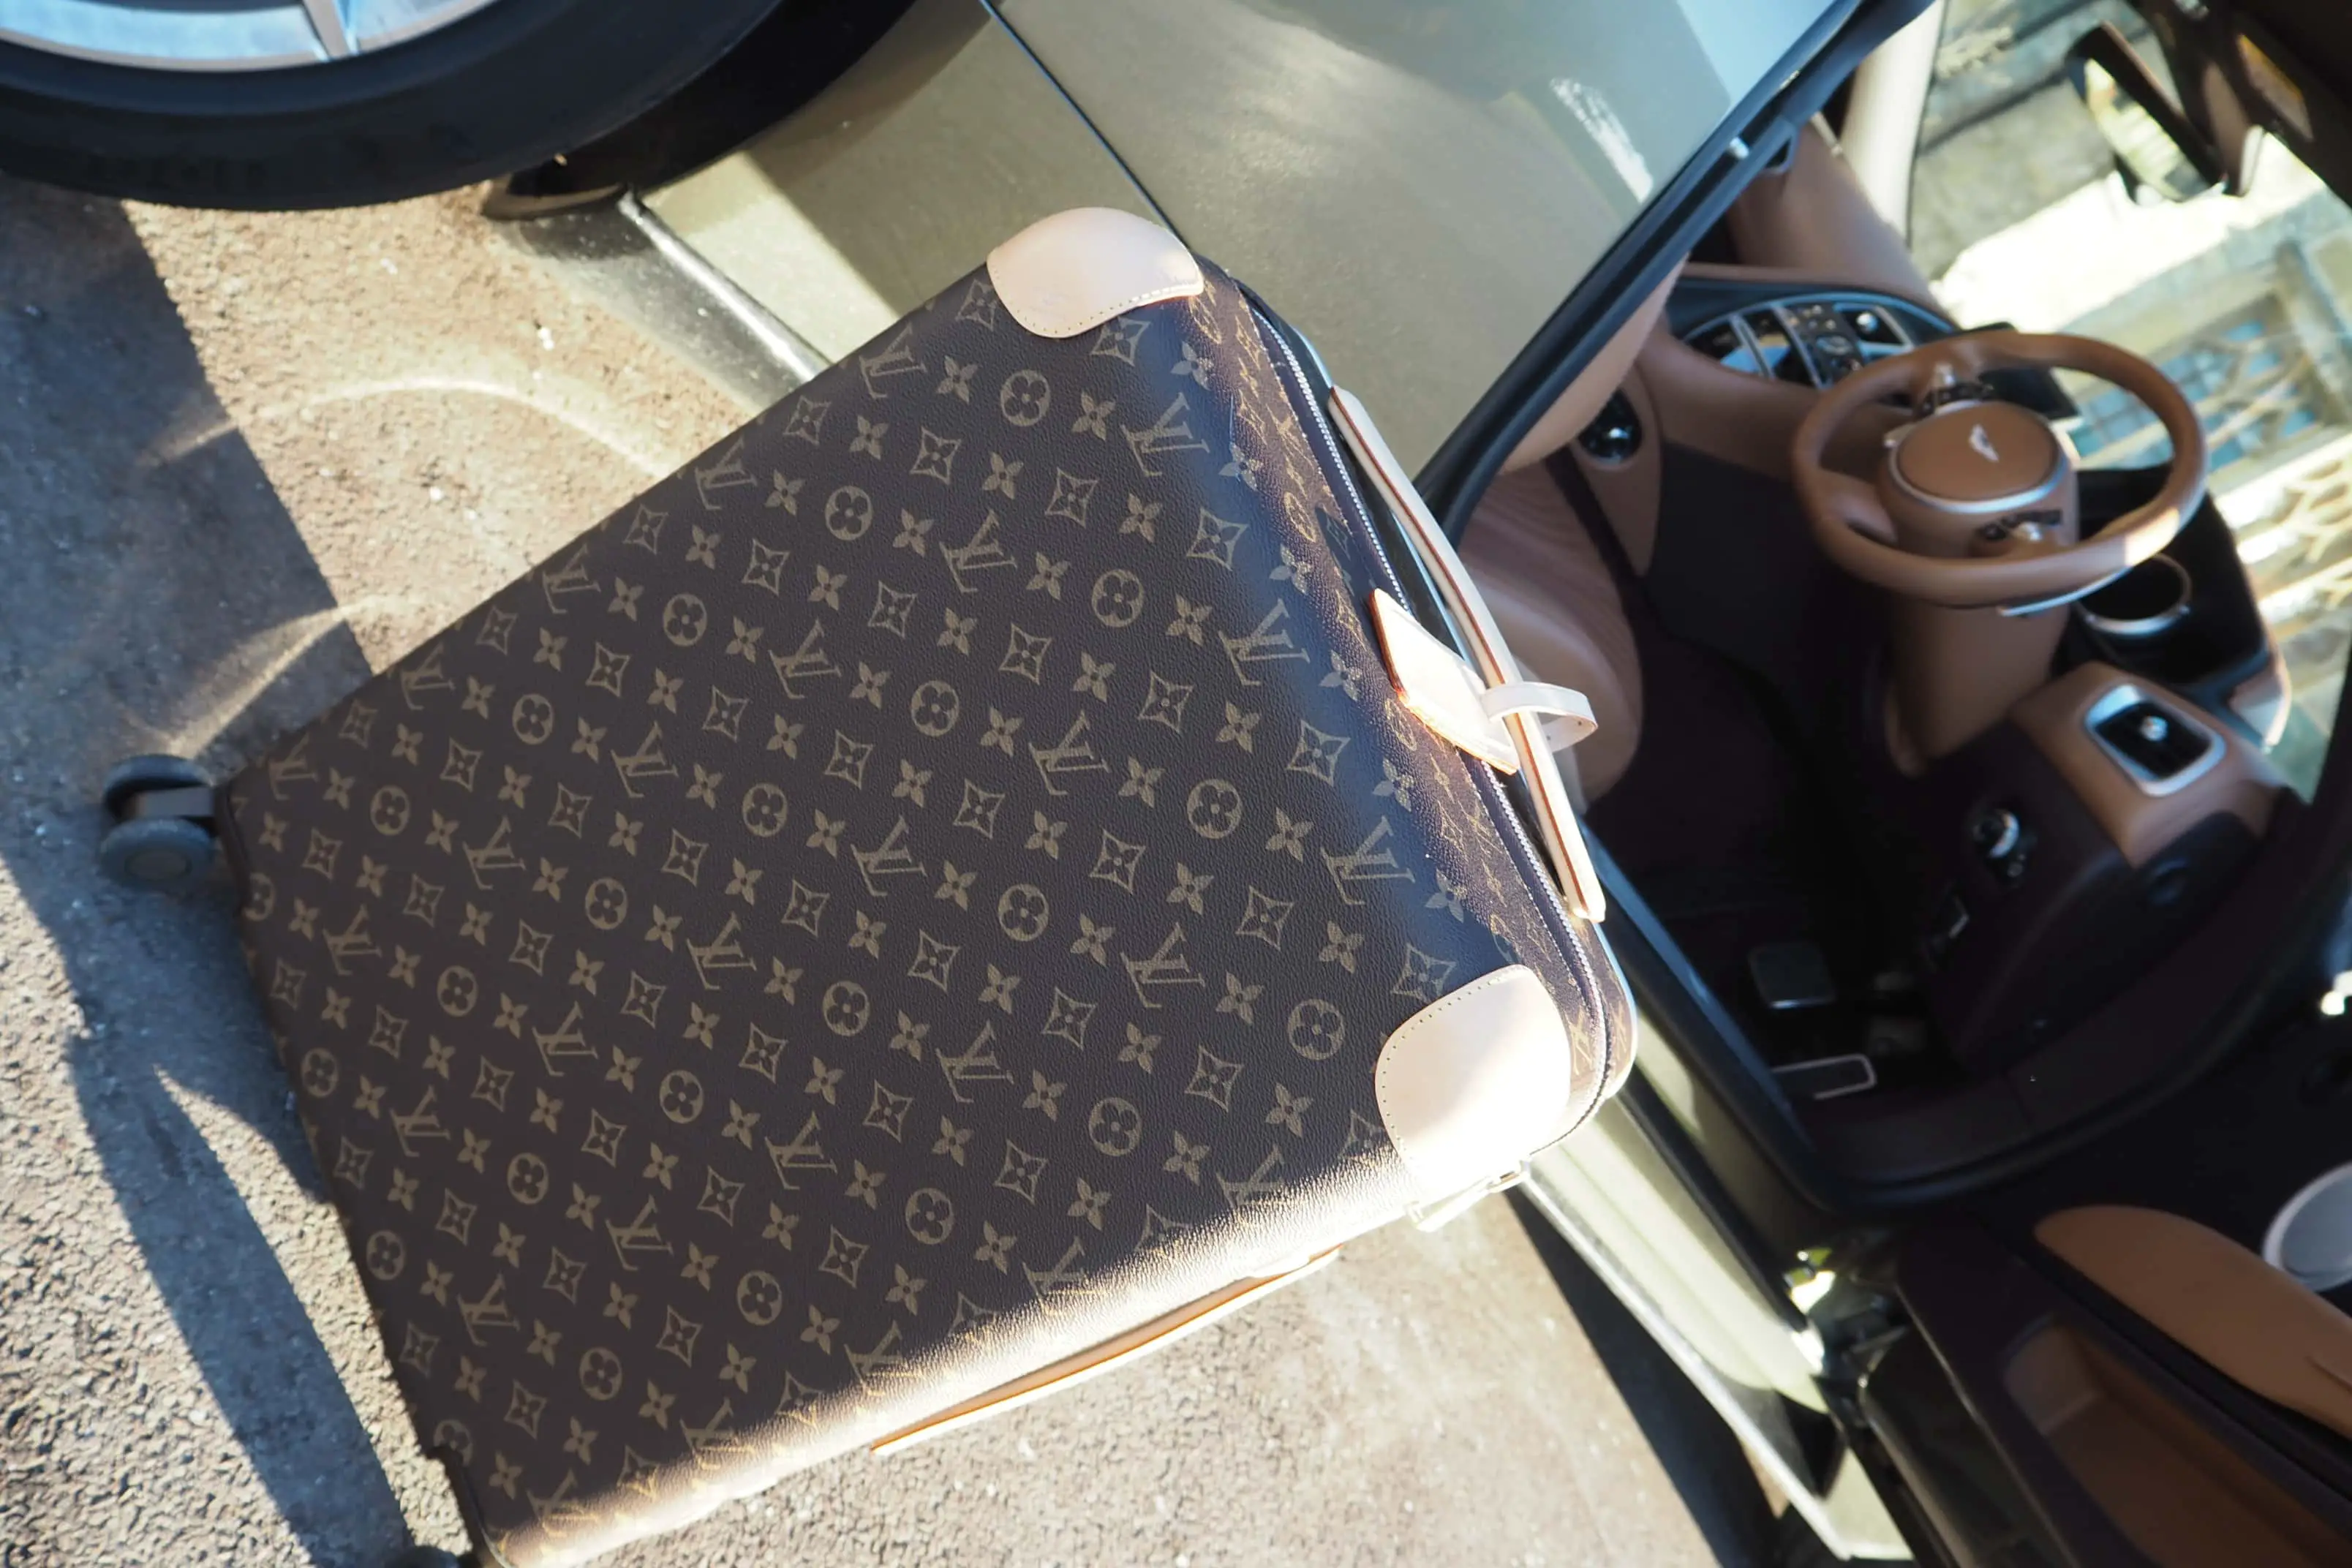 Louis Vuitton Marc Newsome style traveller luggage - The Style Traveller